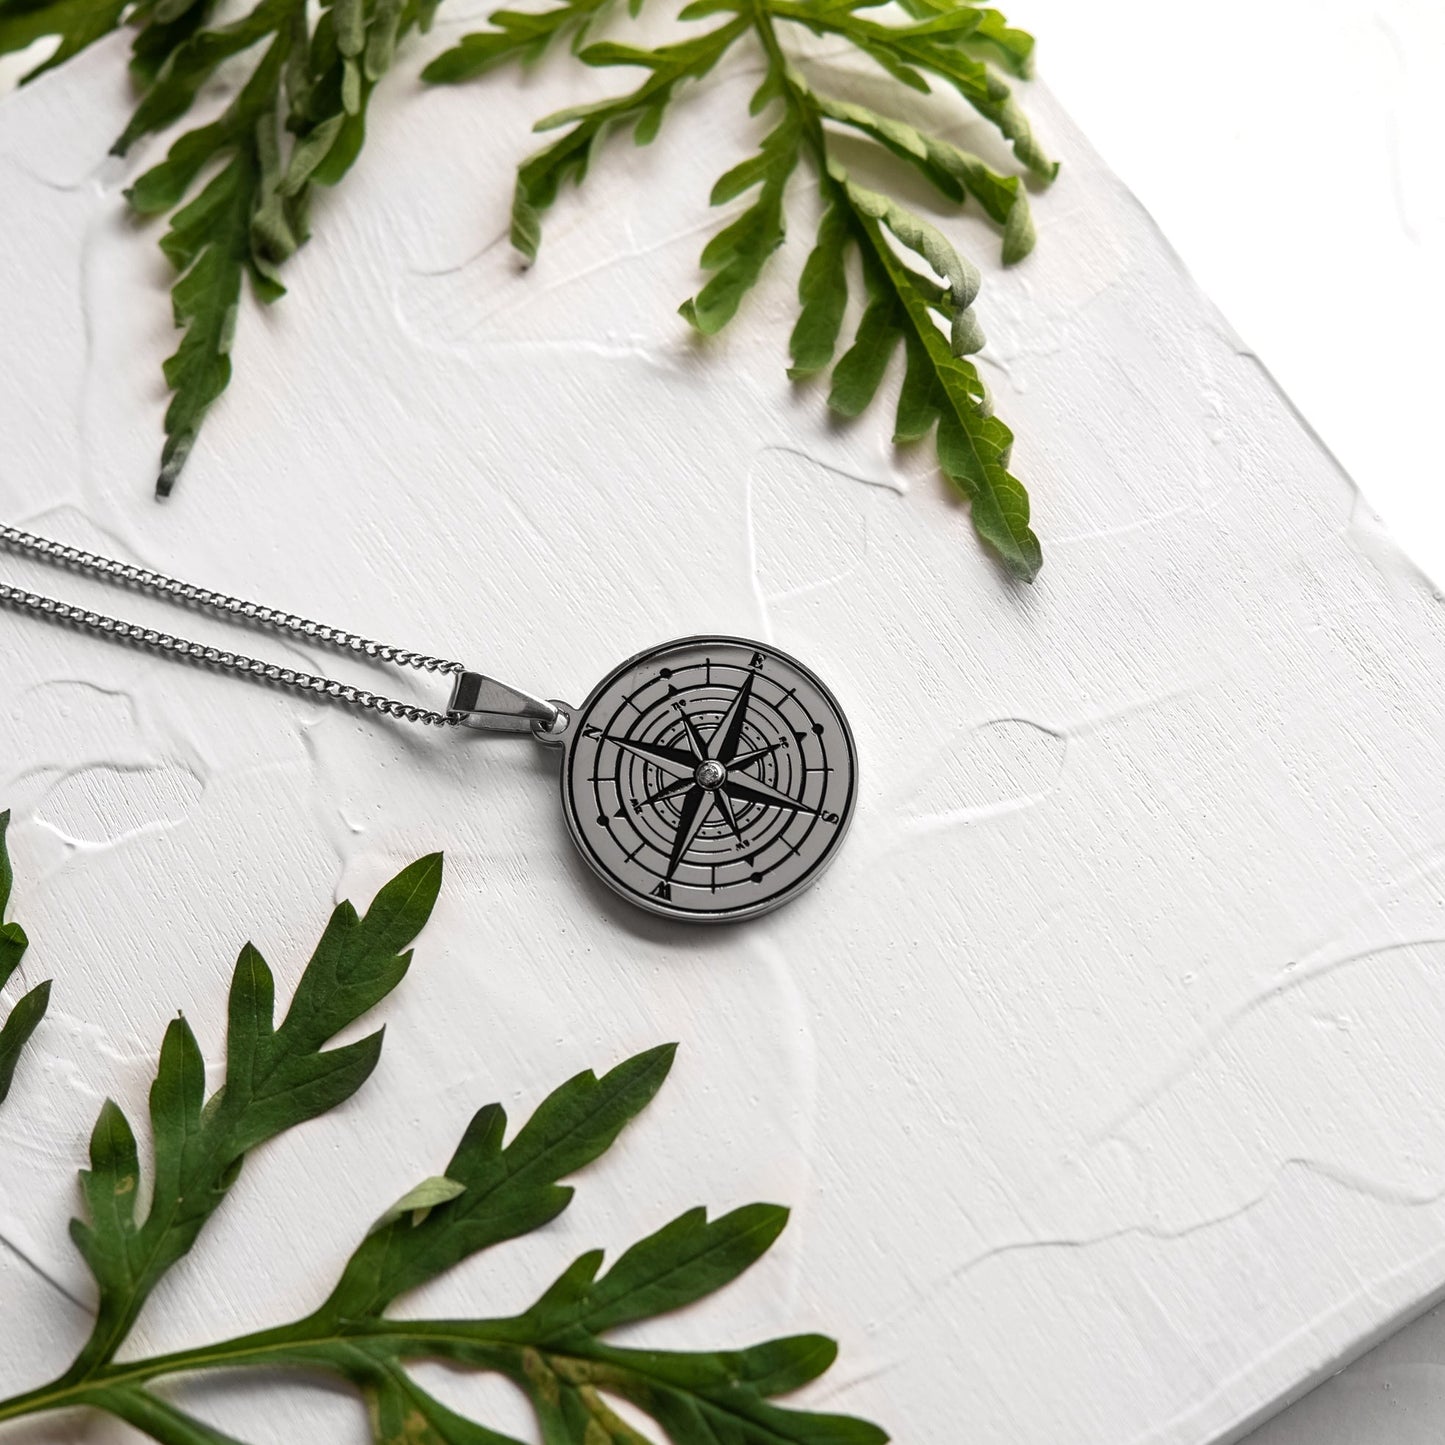 Stainless Steel Nautical Compass CZ Pendant Necklace - Unisex Symbol of Guidance & Protection Jewelry